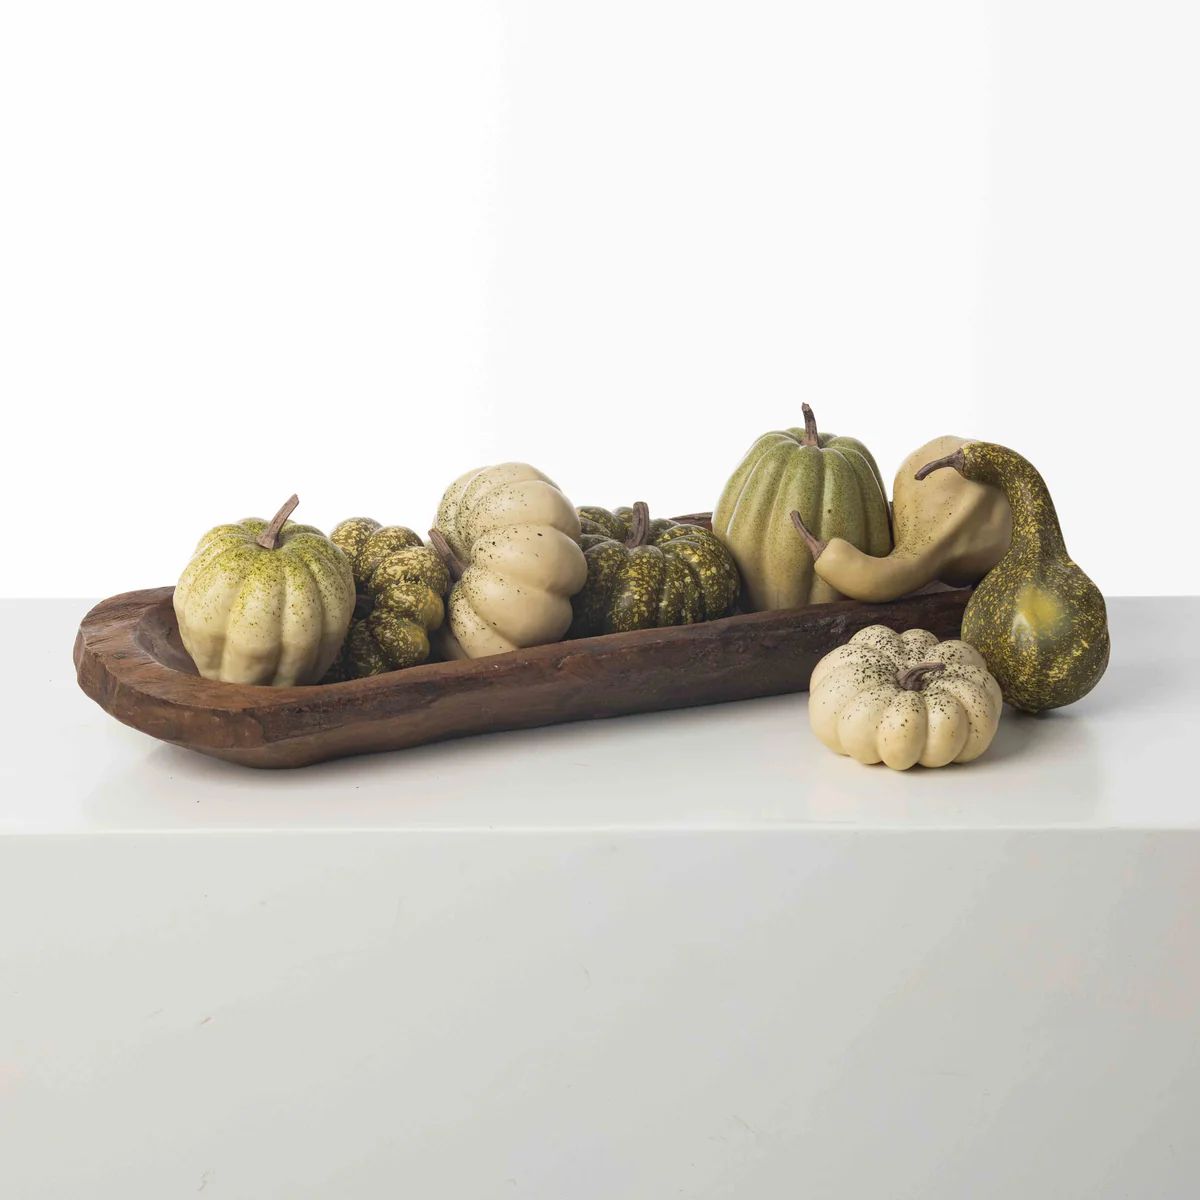 Assorted Set of Small Fall Green & Cream Pumpkins with Gourds | Darby Creek Trading